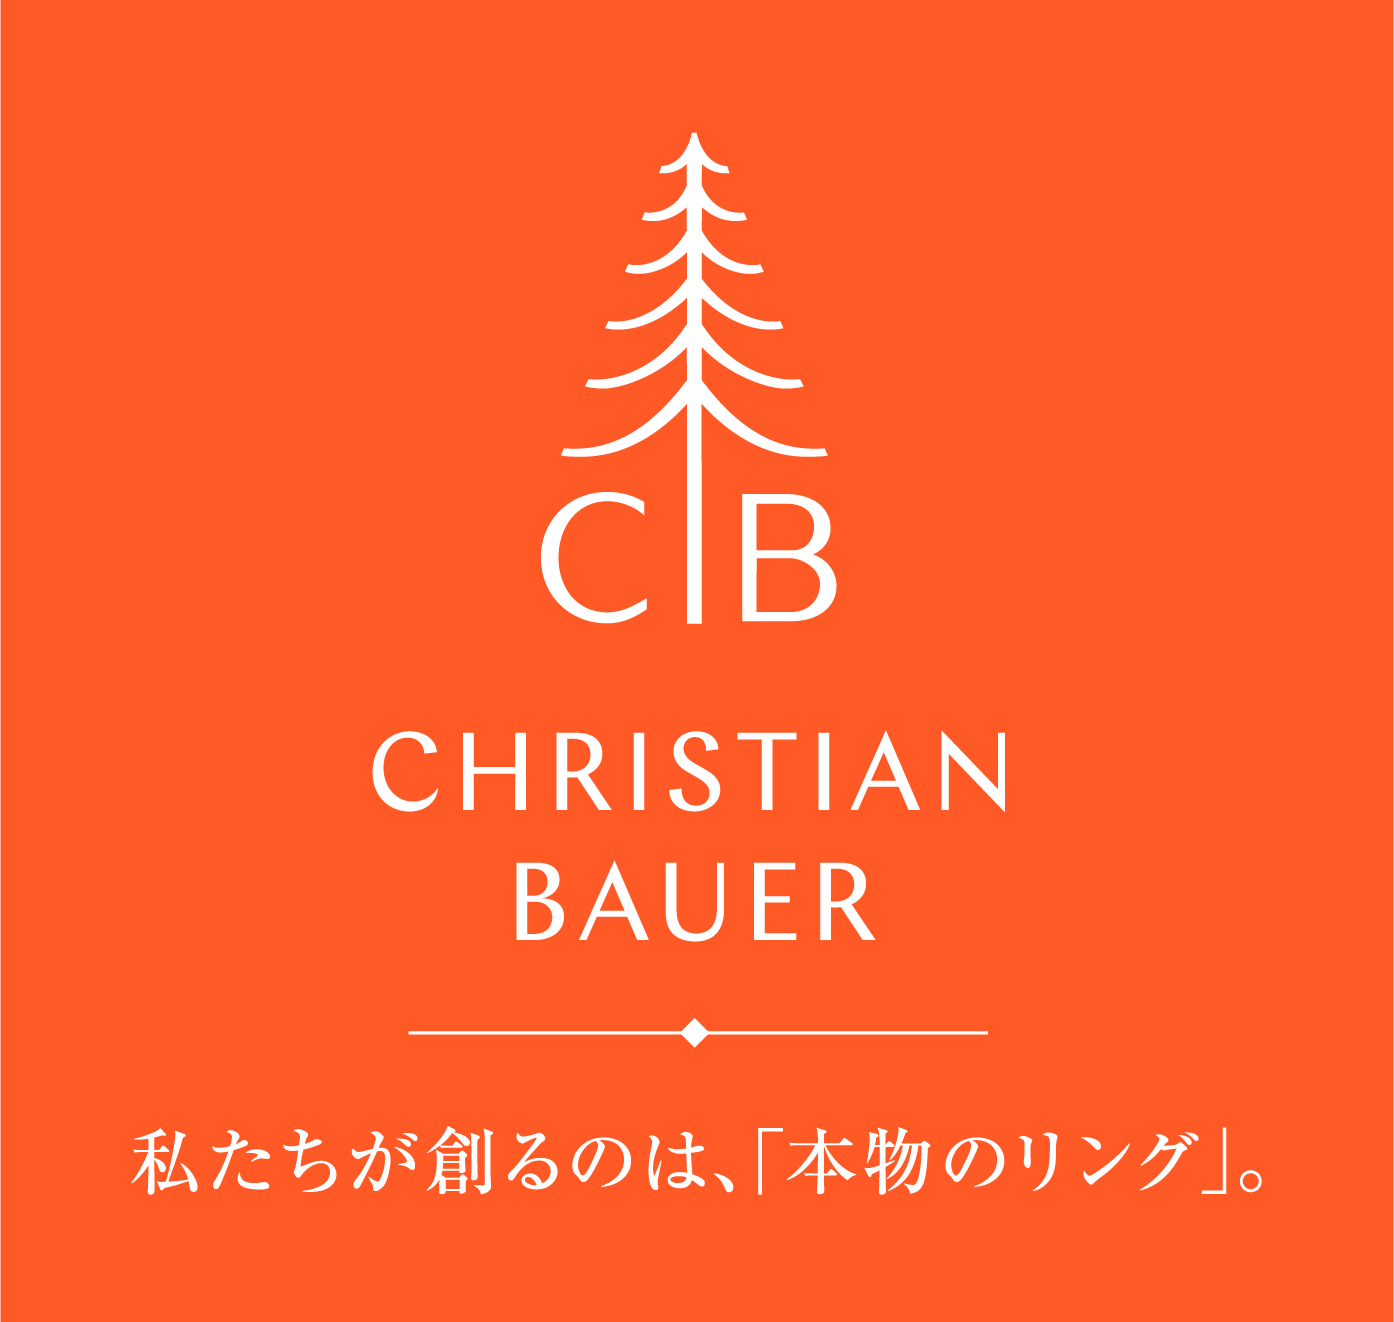 CLEARが紹介するCHRISTIAN BAUER